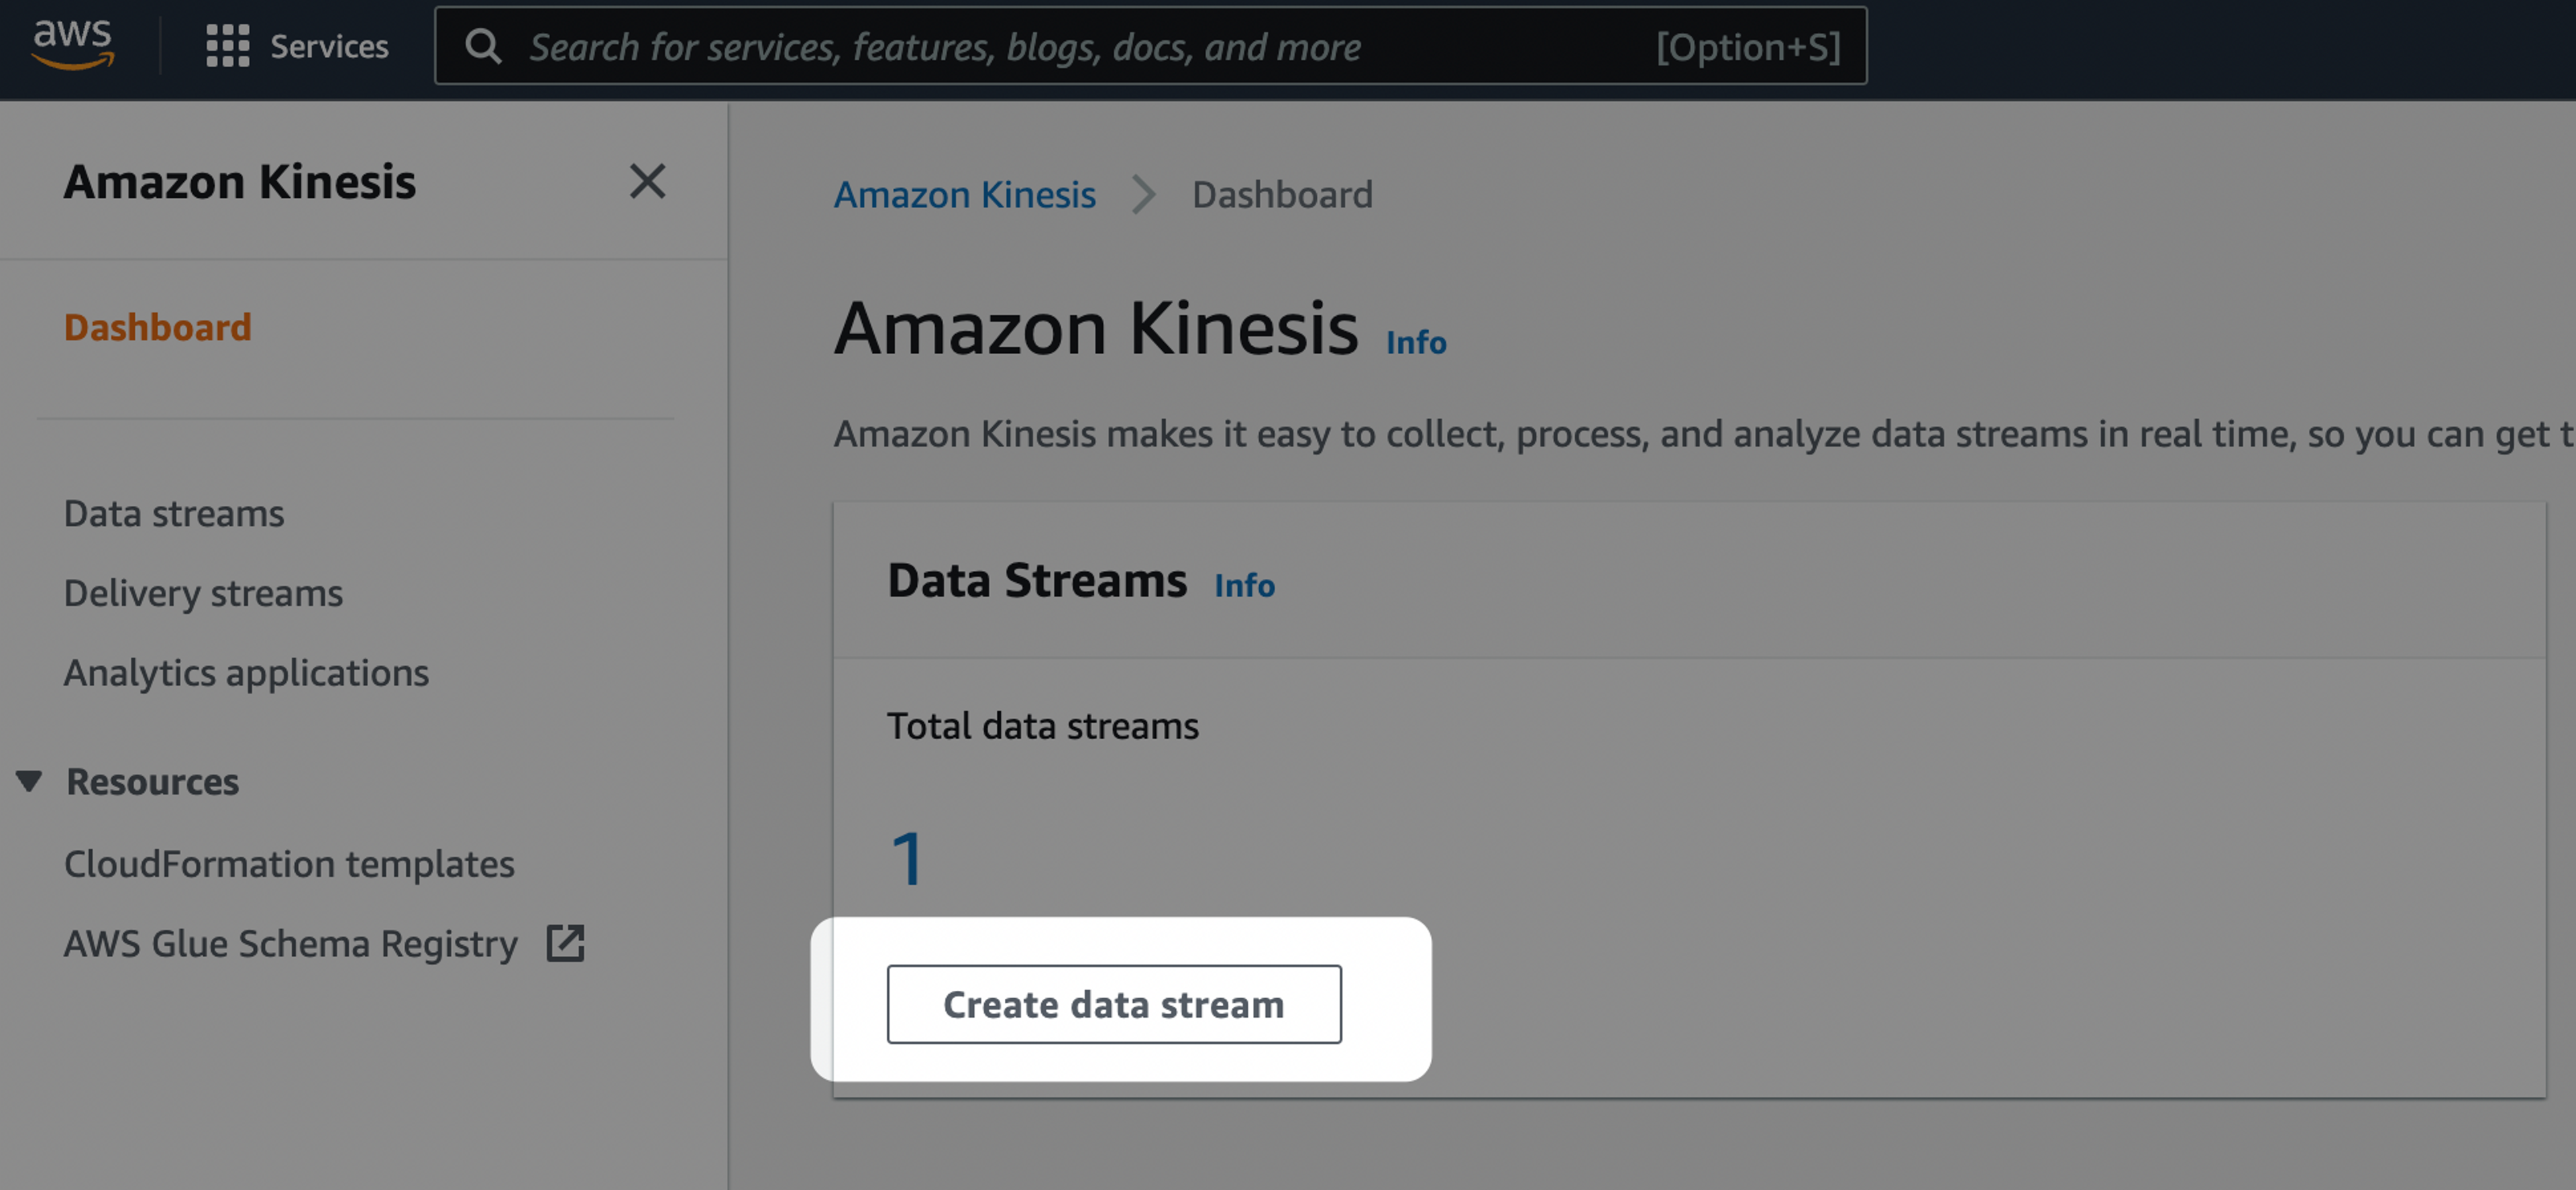 A screenshot of the Amazon Kinesis dashboard with the "Create data stream" button highlighted